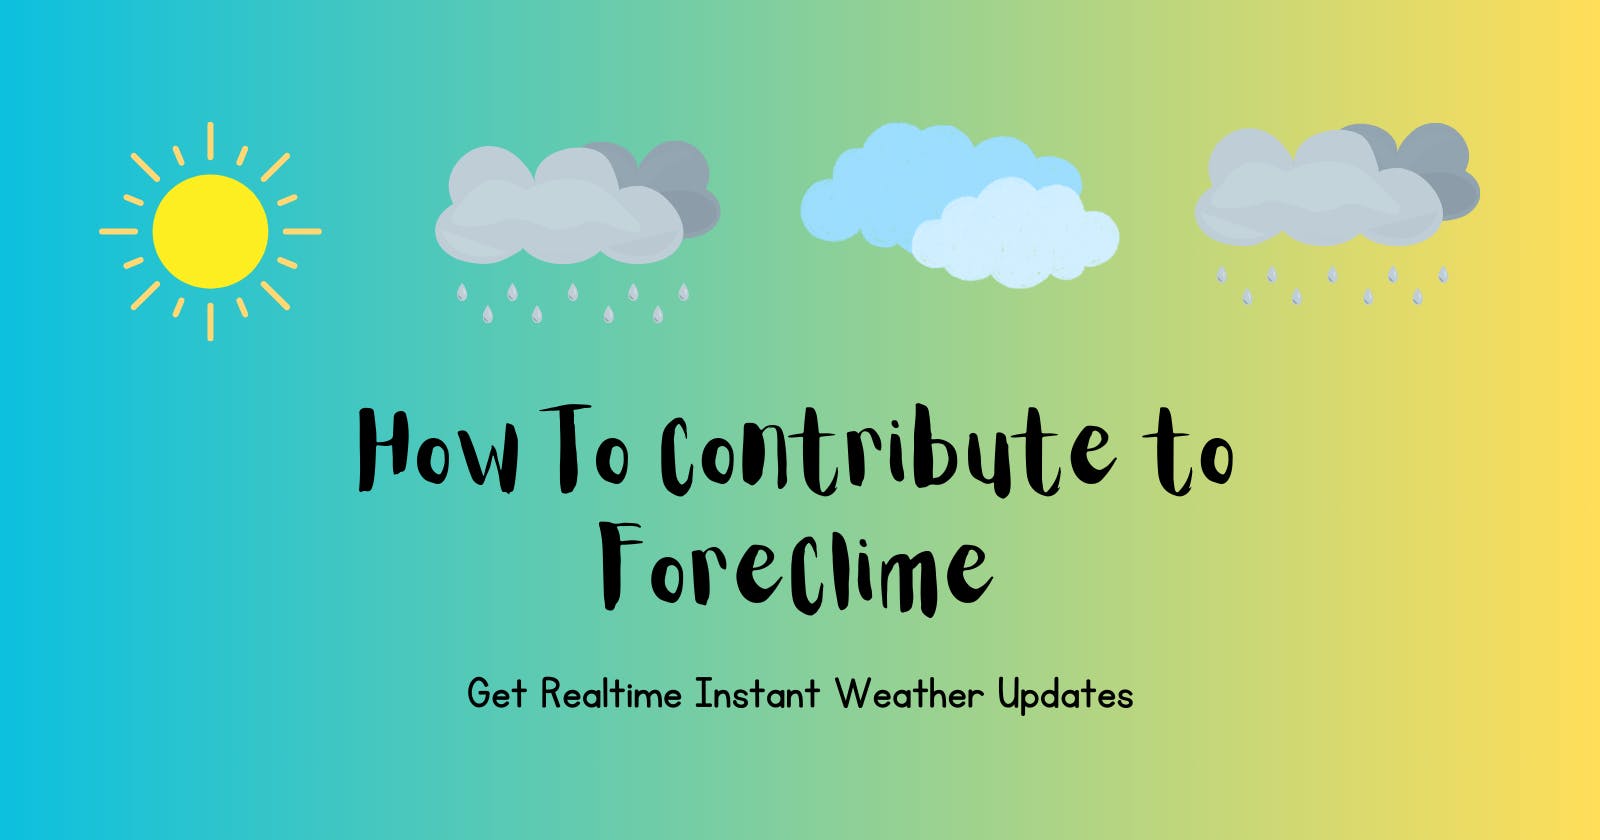 A Guide to Contributing to "ForeClime" 
Weather App